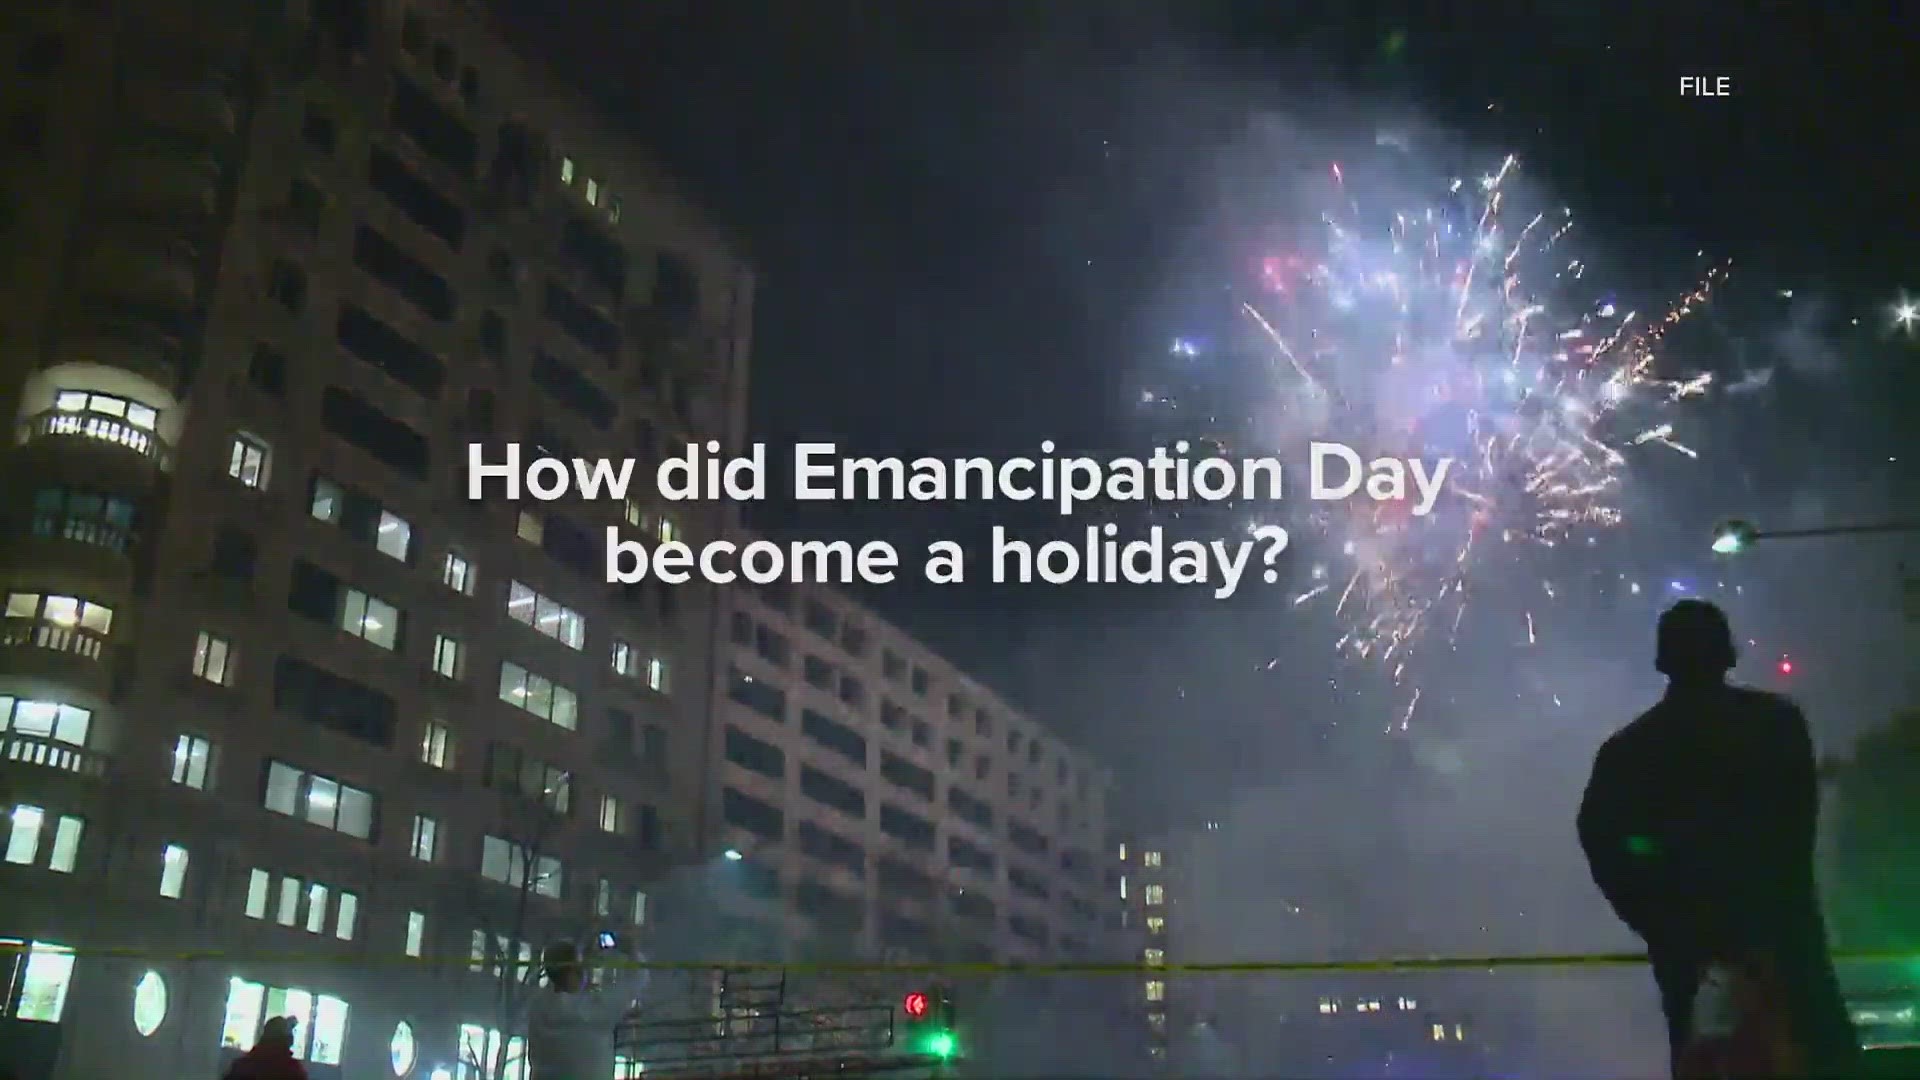 It wasn't until 2005 that the day was officially recognized as a holiday.